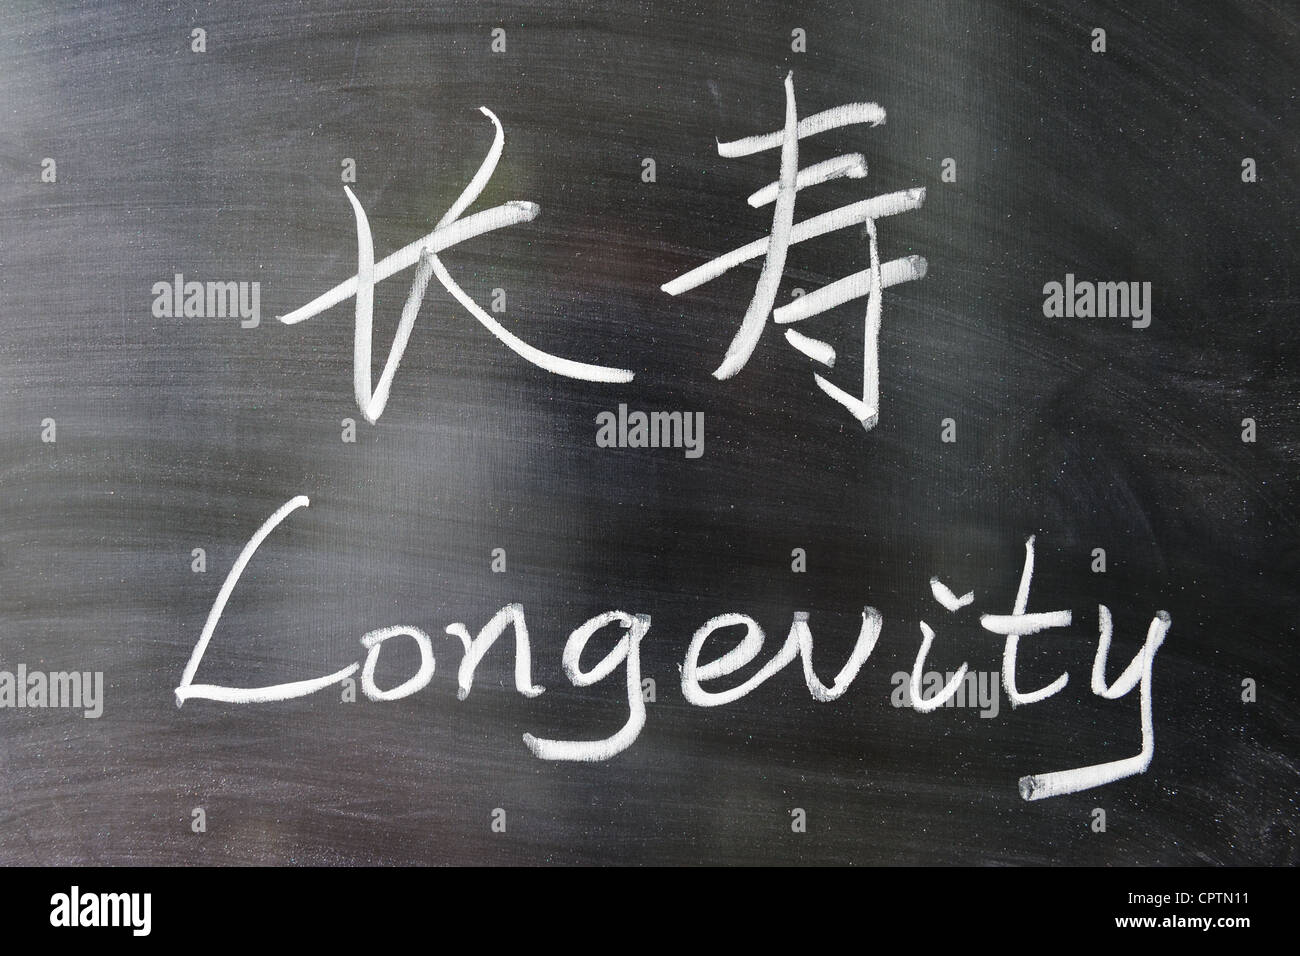 Longevity word in Chinese and English written on the chalkboard Stock Photo